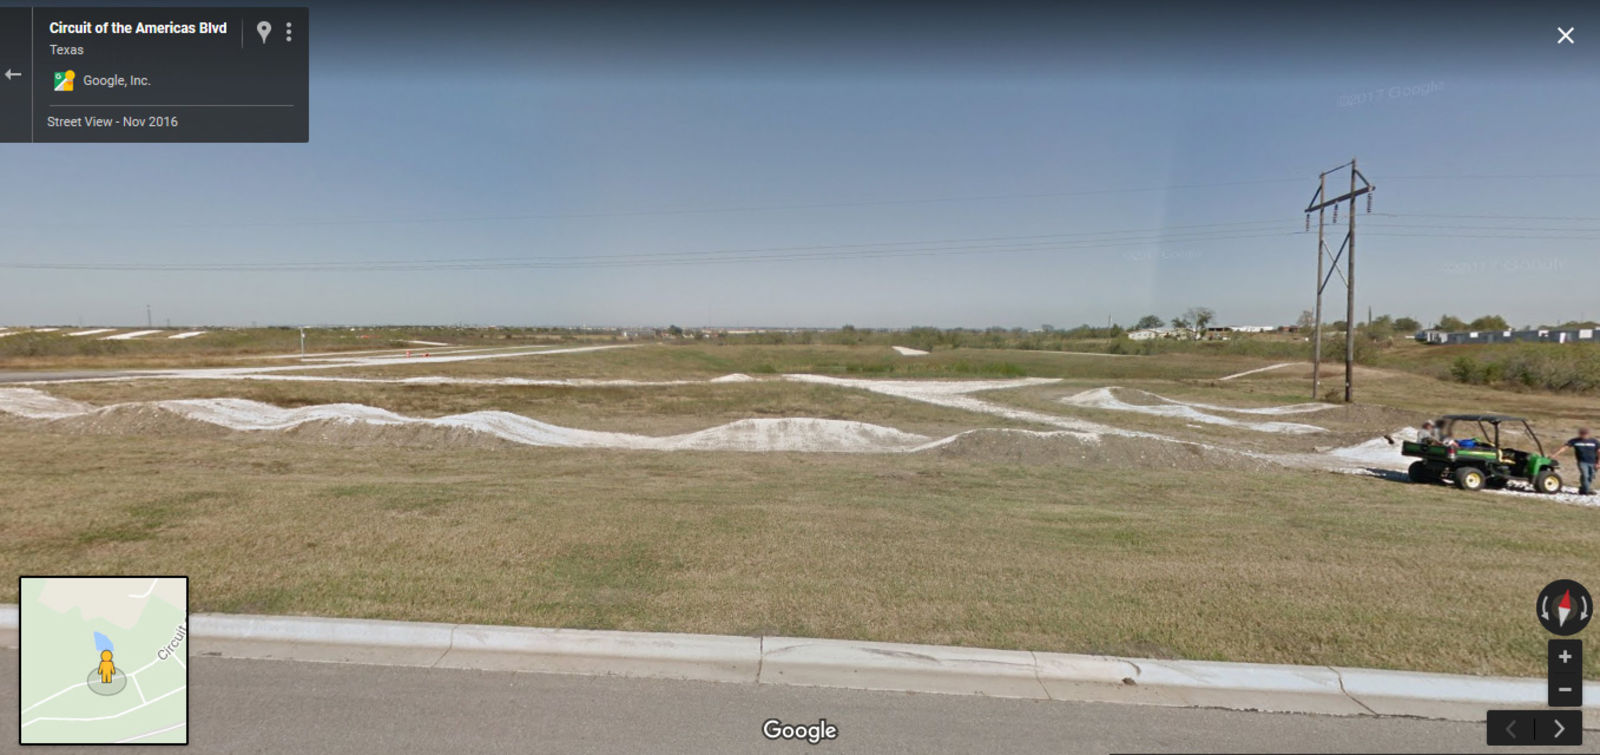 Illustration for article titled Whats the deal with this mini off road track outside COTA?